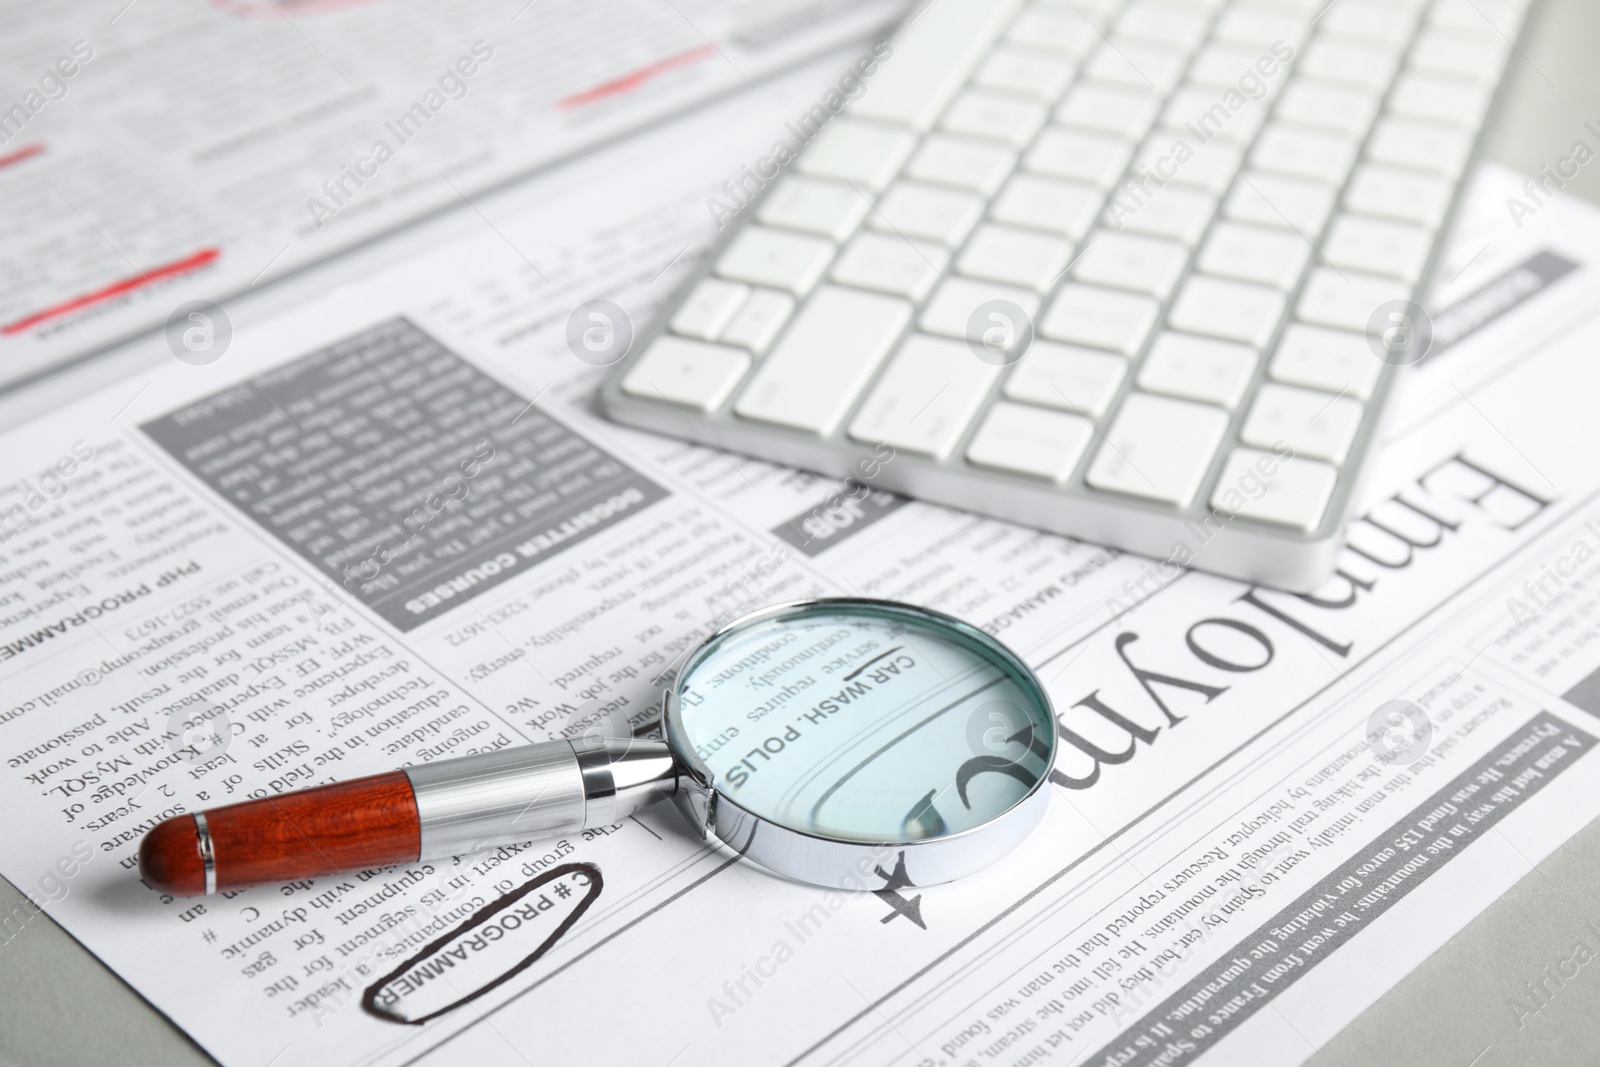 Photo of Magnifying glass and keyboard on newspaper. Job search concept